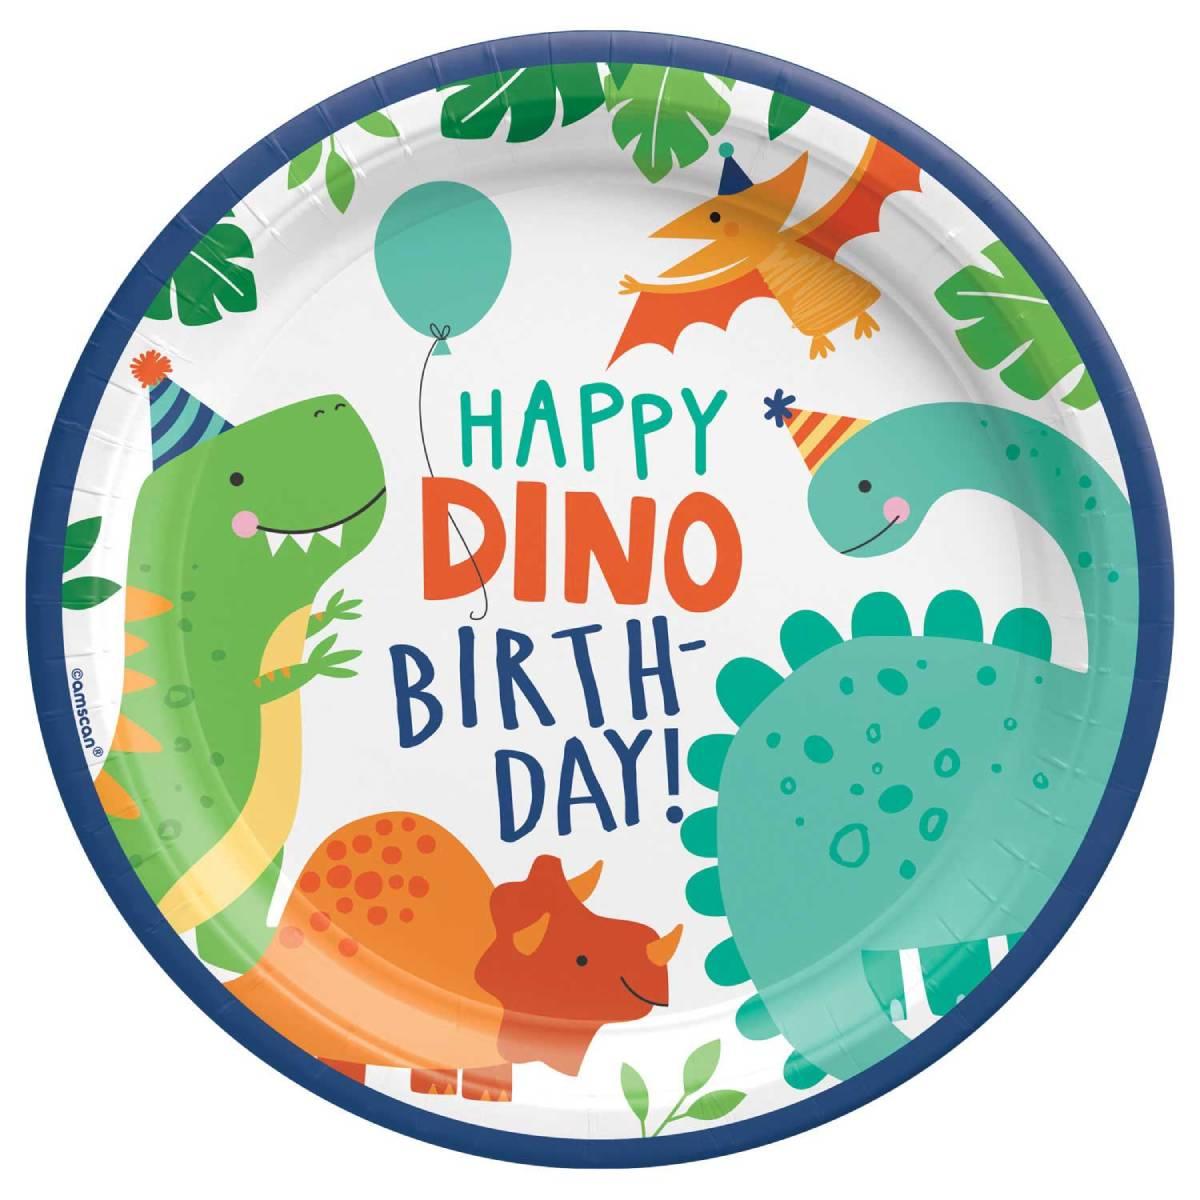 Dyno-Mite 23cm Paper Party Plates with Happy Birthday Message by Amscan 9912584 available here at Karnival Costumes online party shop